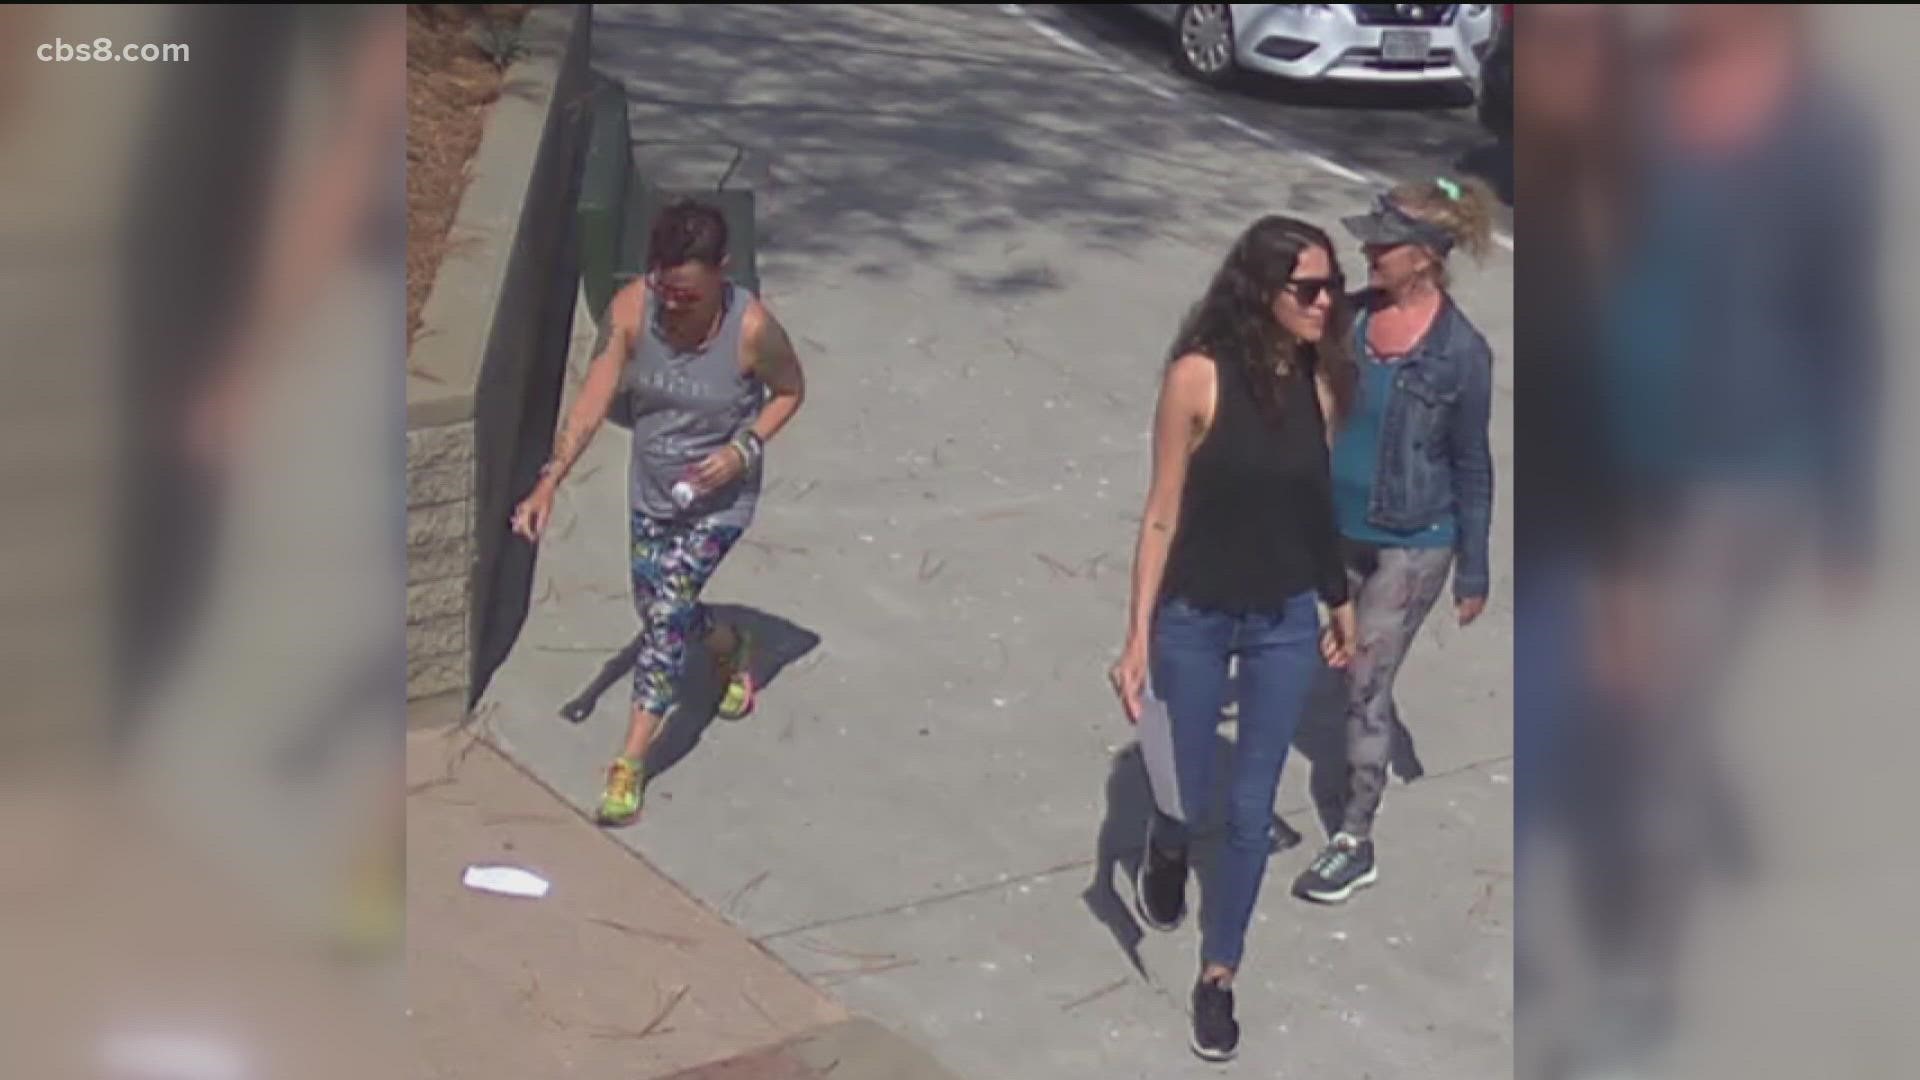 Three women are shown on school surveillance video of taking down state mask guidance signs and putting up their own anti-mask posters at two San Dieguito Union High